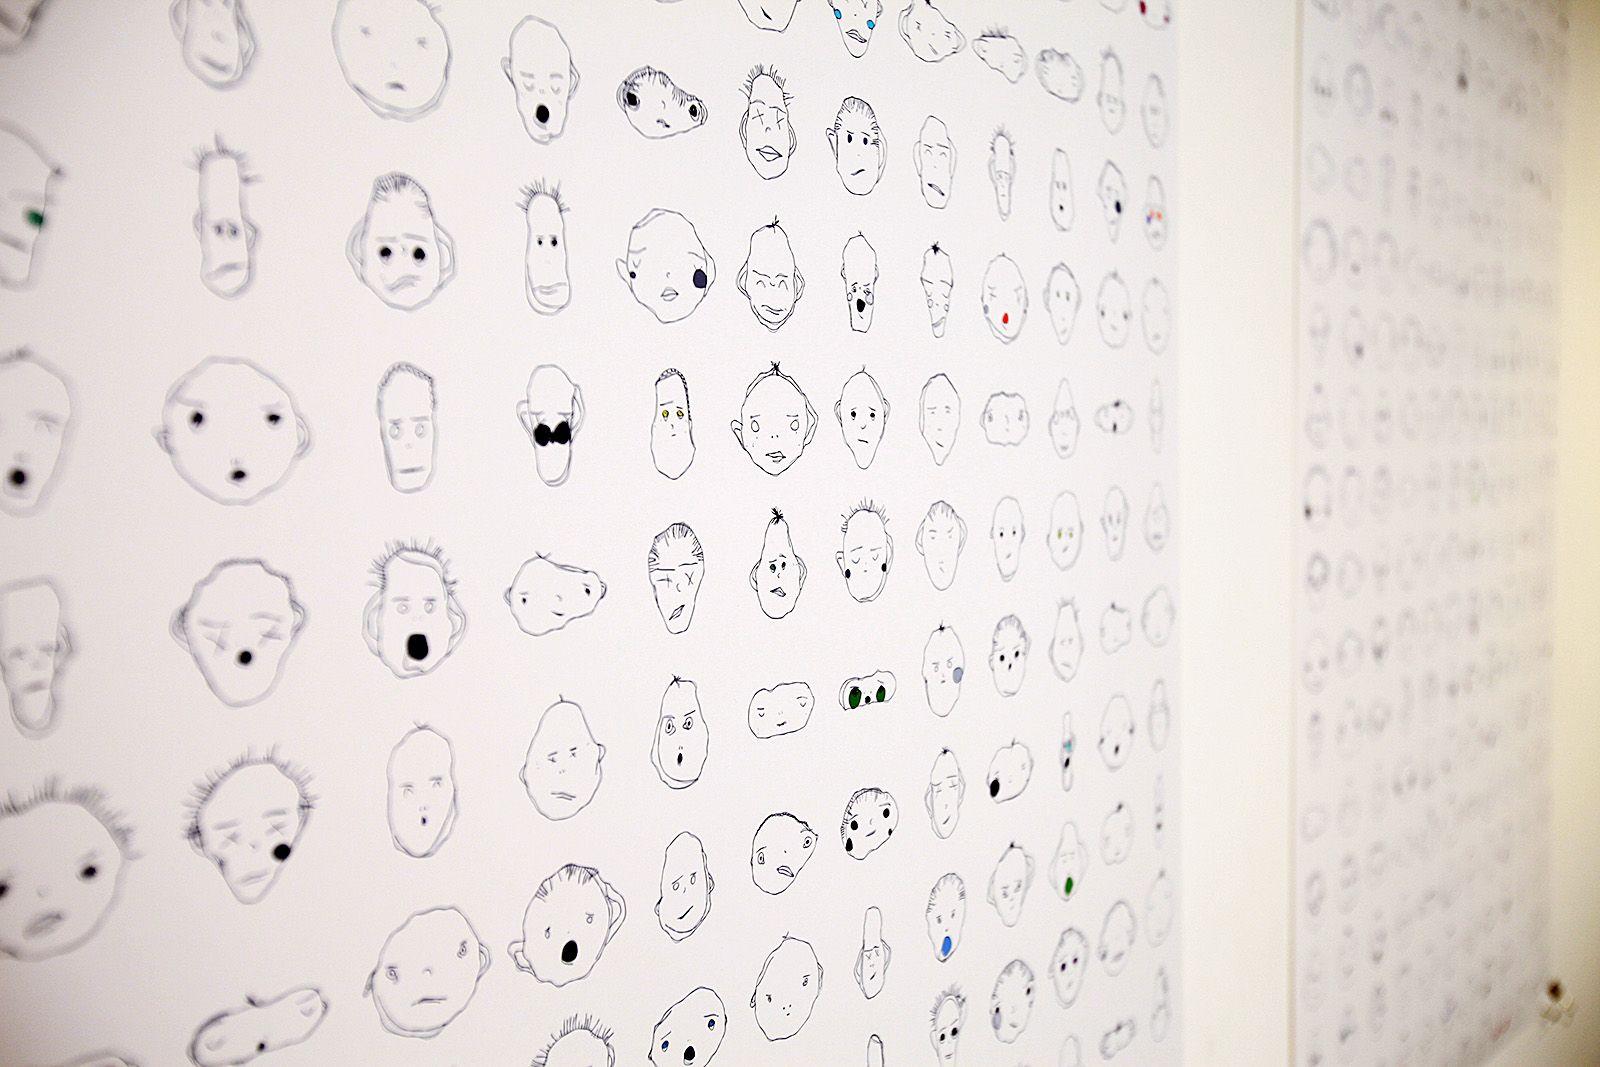 This is a diagonal close up view of two prints of various equally spaced apart weird faces. All of them have two eyes, two eyebrows, and a mouth. Some have hair, a nose, ears, or blush. All have unique expressions and are line drawn in black. Almost none 